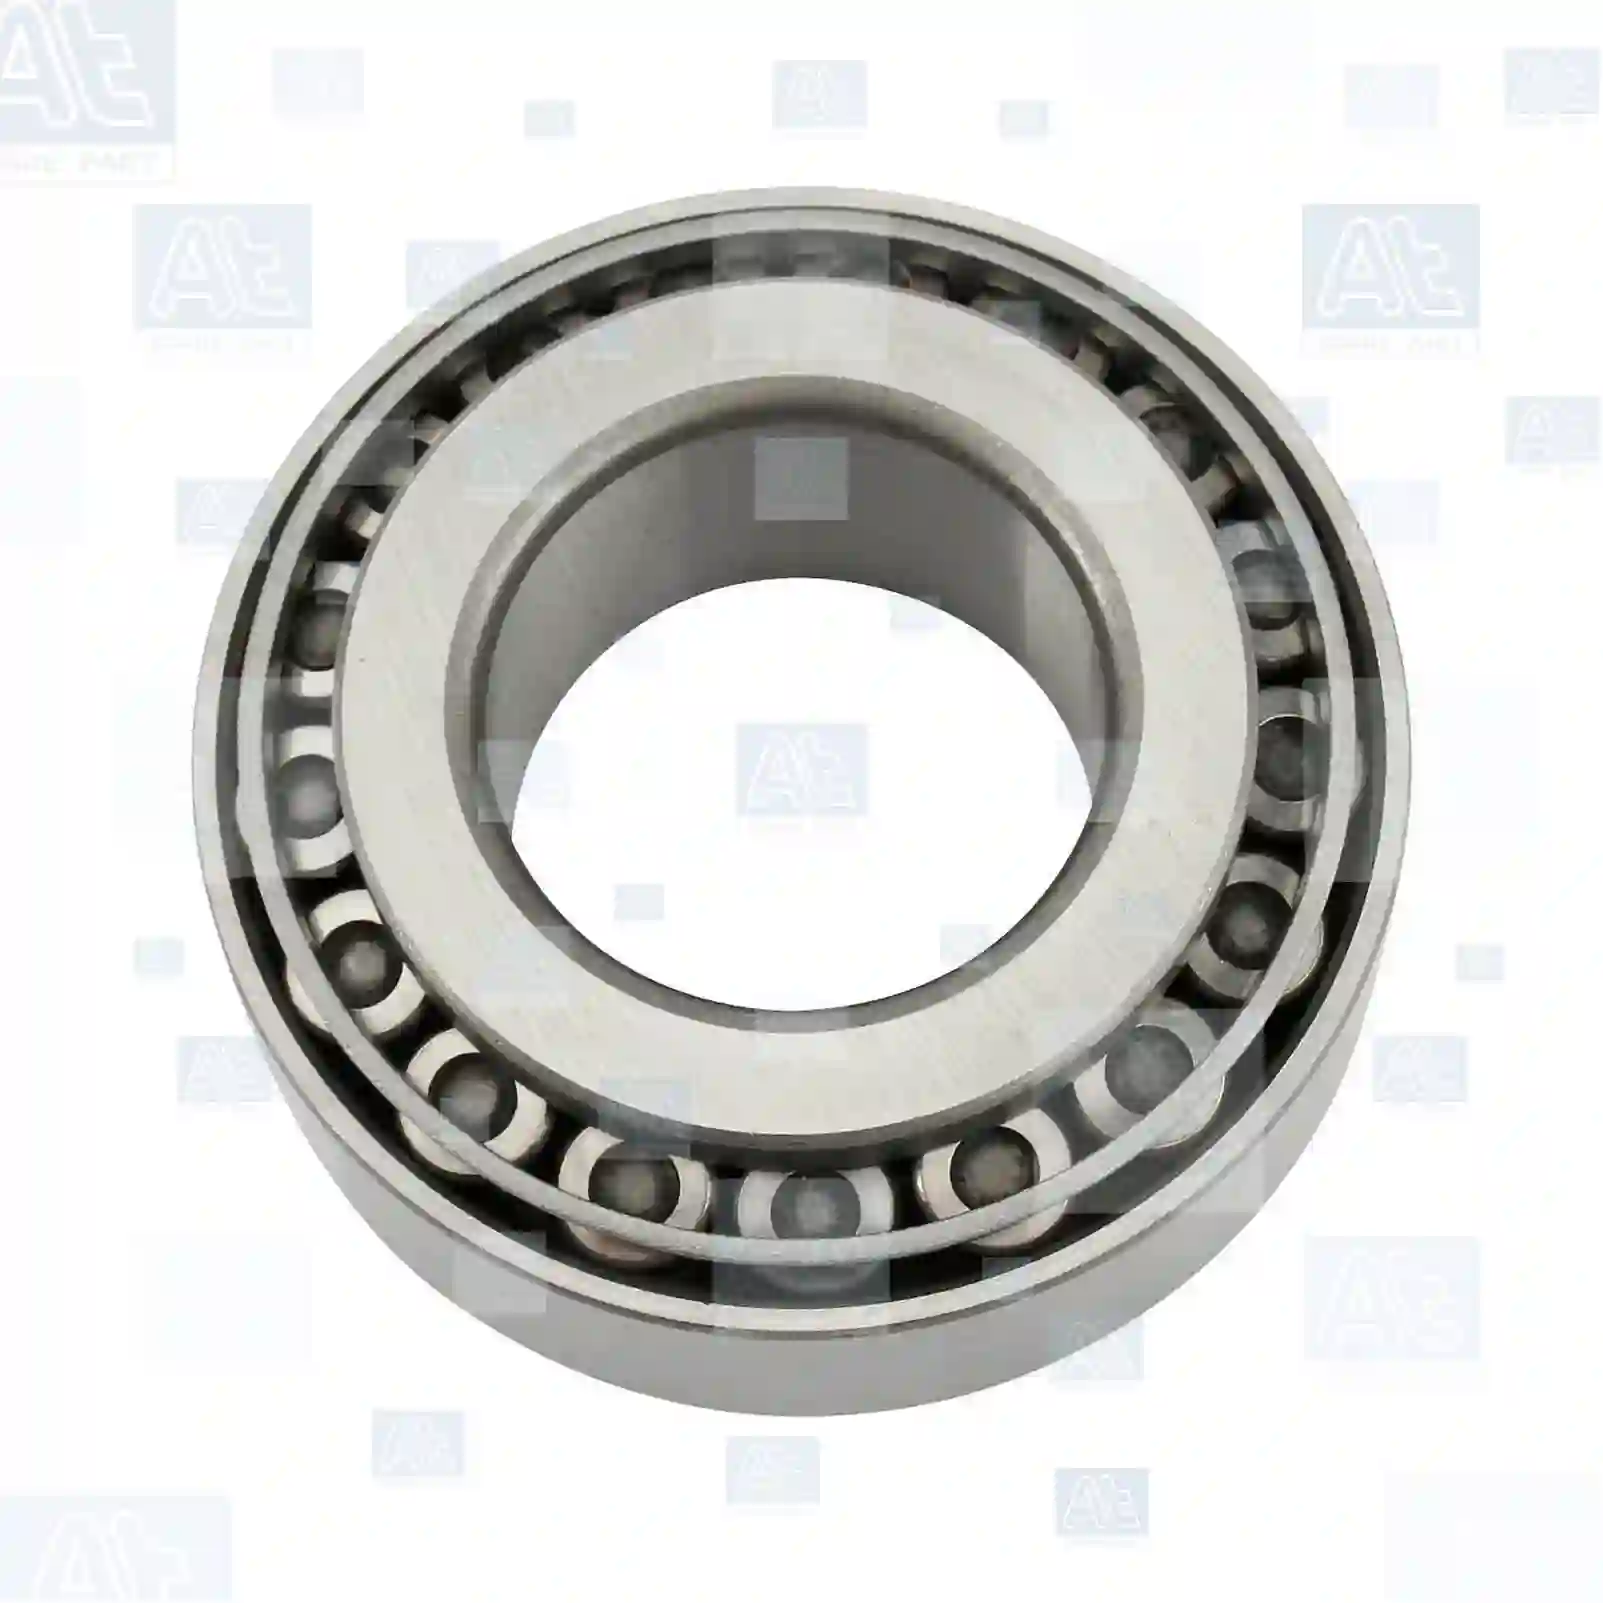 Tapered roller bearing, at no 77733219, oem no: 0264074000, 1527393, 1602391, 08582739, 10500799, 710500799, 12337575, 91122-PW5-008, 8-12337575-0, 01905261, 08582739, 08859652, 1905261, 410350005465, 06324890002, 06324890043, 81934200077, 81934200205, 81934200285, 0039813905, 0039817205, 0049816805, 0069816205, 0089810105, 0089817505, 3849817605, 0000546524, 5000546524, 5001830654, 5010136762, 5010439056, 4200005900, 284843, 1652127, 184679, 3094303, 8582739, ZG02965-0008 At Spare Part | Engine, Accelerator Pedal, Camshaft, Connecting Rod, Crankcase, Crankshaft, Cylinder Head, Engine Suspension Mountings, Exhaust Manifold, Exhaust Gas Recirculation, Filter Kits, Flywheel Housing, General Overhaul Kits, Engine, Intake Manifold, Oil Cleaner, Oil Cooler, Oil Filter, Oil Pump, Oil Sump, Piston & Liner, Sensor & Switch, Timing Case, Turbocharger, Cooling System, Belt Tensioner, Coolant Filter, Coolant Pipe, Corrosion Prevention Agent, Drive, Expansion Tank, Fan, Intercooler, Monitors & Gauges, Radiator, Thermostat, V-Belt / Timing belt, Water Pump, Fuel System, Electronical Injector Unit, Feed Pump, Fuel Filter, cpl., Fuel Gauge Sender,  Fuel Line, Fuel Pump, Fuel Tank, Injection Line Kit, Injection Pump, Exhaust System, Clutch & Pedal, Gearbox, Propeller Shaft, Axles, Brake System, Hubs & Wheels, Suspension, Leaf Spring, Universal Parts / Accessories, Steering, Electrical System, Cabin Tapered roller bearing, at no 77733219, oem no: 0264074000, 1527393, 1602391, 08582739, 10500799, 710500799, 12337575, 91122-PW5-008, 8-12337575-0, 01905261, 08582739, 08859652, 1905261, 410350005465, 06324890002, 06324890043, 81934200077, 81934200205, 81934200285, 0039813905, 0039817205, 0049816805, 0069816205, 0089810105, 0089817505, 3849817605, 0000546524, 5000546524, 5001830654, 5010136762, 5010439056, 4200005900, 284843, 1652127, 184679, 3094303, 8582739, ZG02965-0008 At Spare Part | Engine, Accelerator Pedal, Camshaft, Connecting Rod, Crankcase, Crankshaft, Cylinder Head, Engine Suspension Mountings, Exhaust Manifold, Exhaust Gas Recirculation, Filter Kits, Flywheel Housing, General Overhaul Kits, Engine, Intake Manifold, Oil Cleaner, Oil Cooler, Oil Filter, Oil Pump, Oil Sump, Piston & Liner, Sensor & Switch, Timing Case, Turbocharger, Cooling System, Belt Tensioner, Coolant Filter, Coolant Pipe, Corrosion Prevention Agent, Drive, Expansion Tank, Fan, Intercooler, Monitors & Gauges, Radiator, Thermostat, V-Belt / Timing belt, Water Pump, Fuel System, Electronical Injector Unit, Feed Pump, Fuel Filter, cpl., Fuel Gauge Sender,  Fuel Line, Fuel Pump, Fuel Tank, Injection Line Kit, Injection Pump, Exhaust System, Clutch & Pedal, Gearbox, Propeller Shaft, Axles, Brake System, Hubs & Wheels, Suspension, Leaf Spring, Universal Parts / Accessories, Steering, Electrical System, Cabin